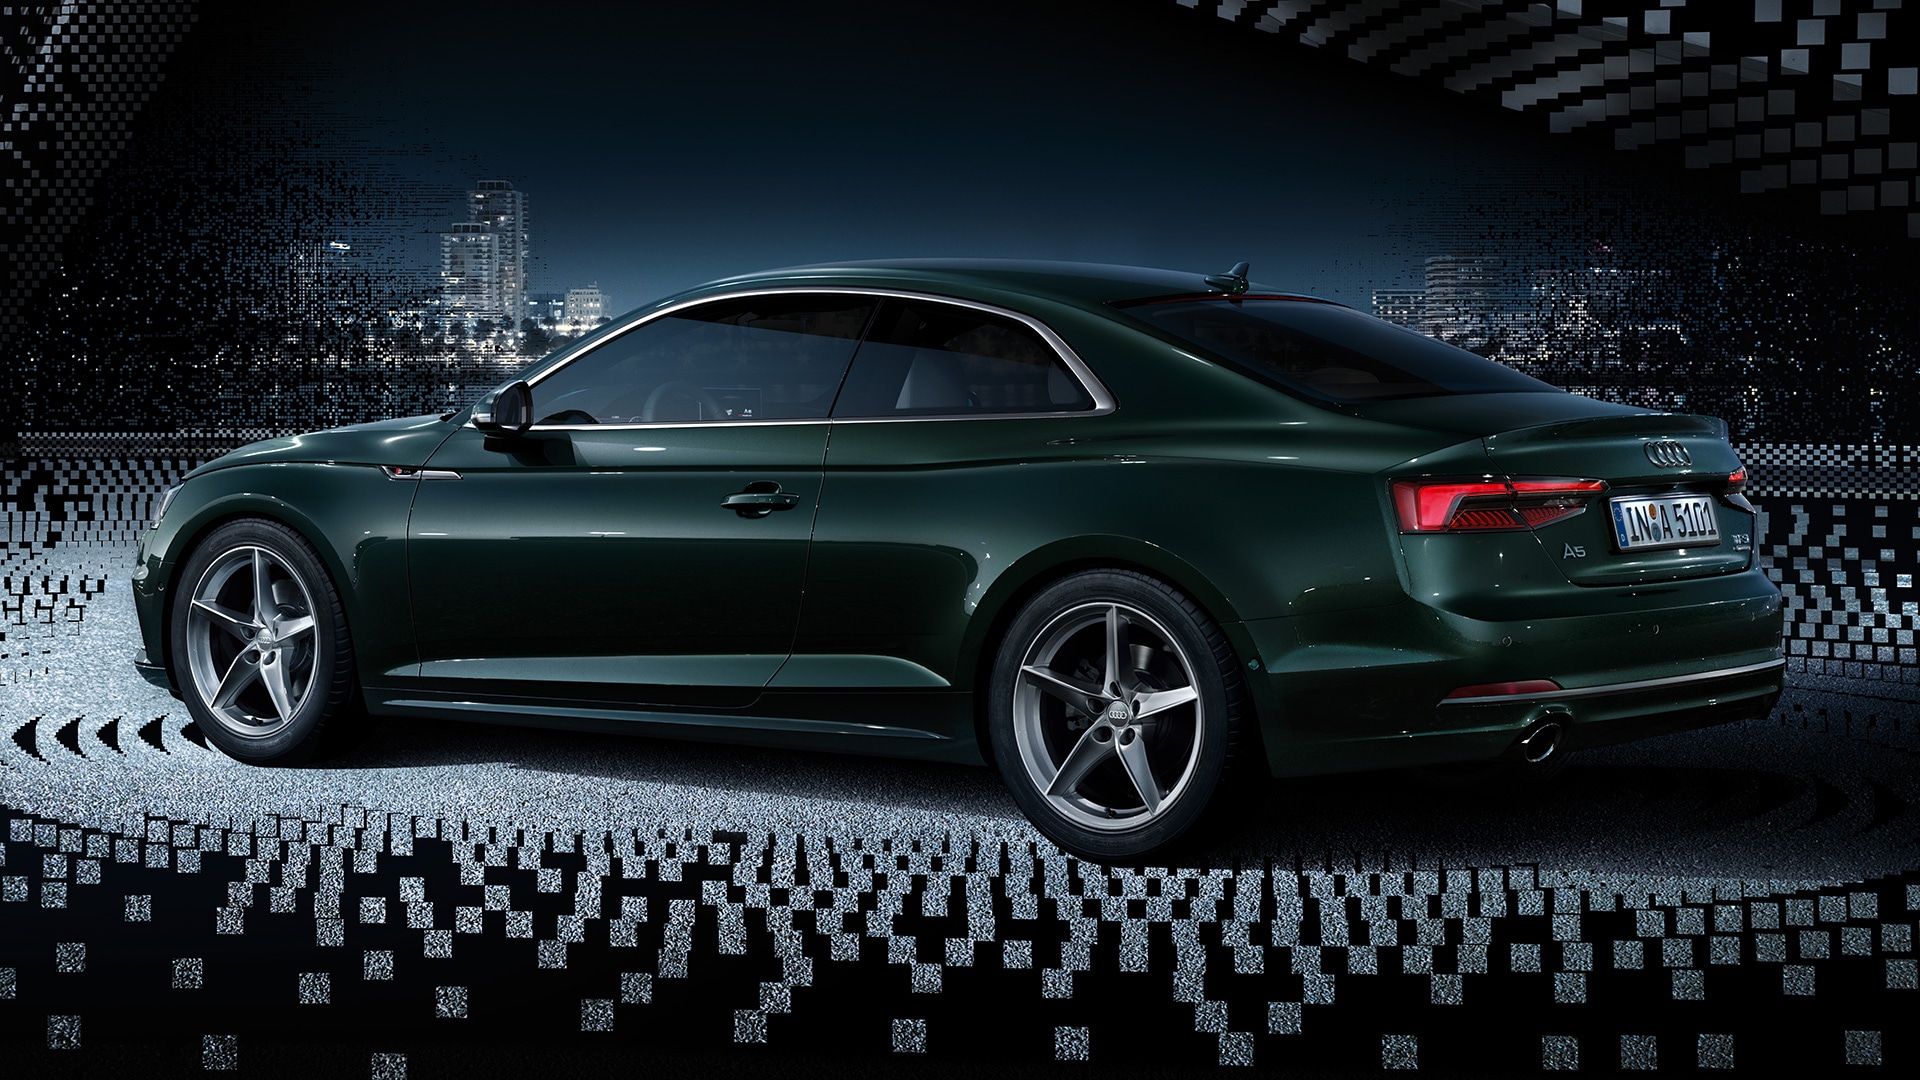 Rent A Audi A5 Coupe For An Hour In Dubai